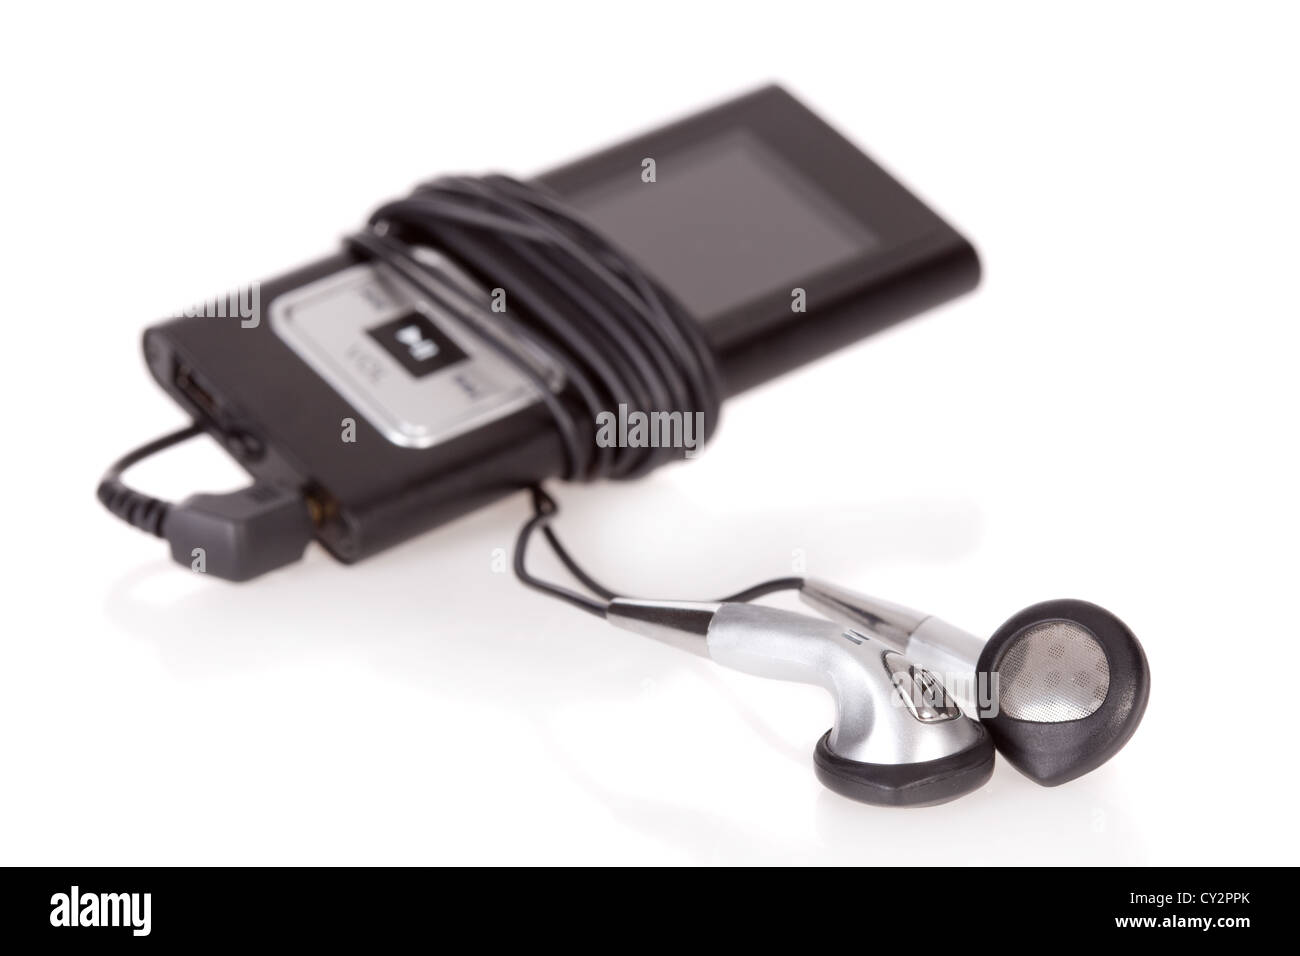 mp4 player isolated on a white background Stock Photo